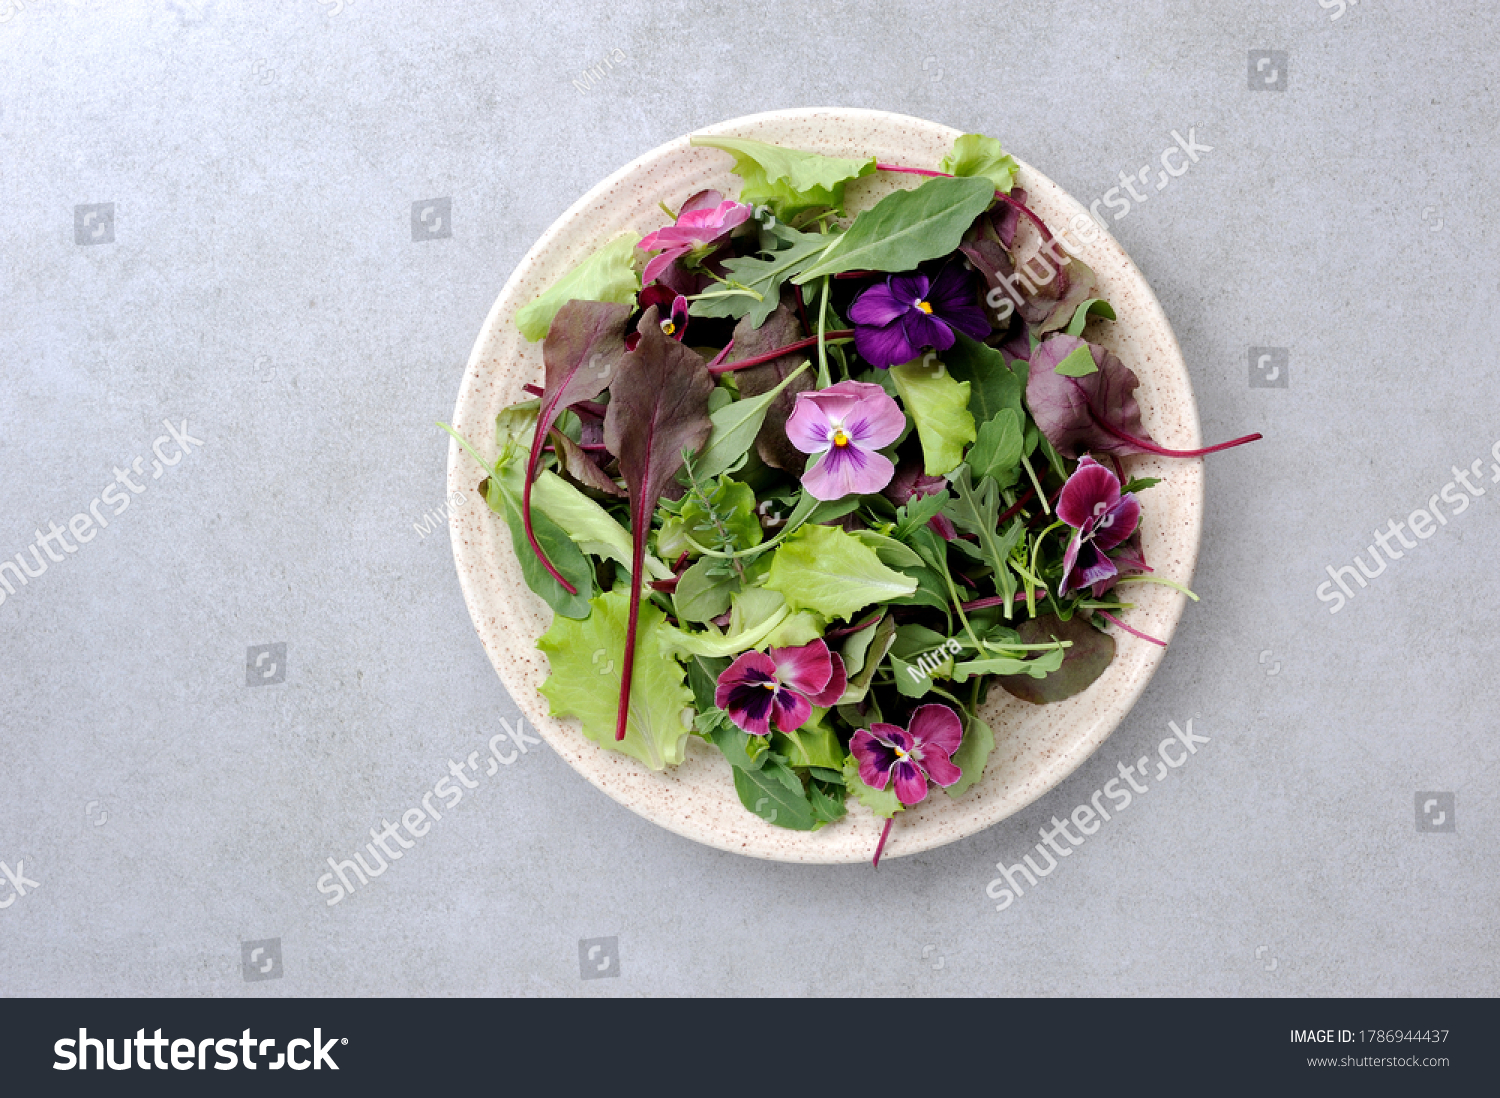 Creative arrangement with colorful    eatable  flowers and green leaves  salad over gray stone background. Flat lay. Minimal summer food concept. #1786944437